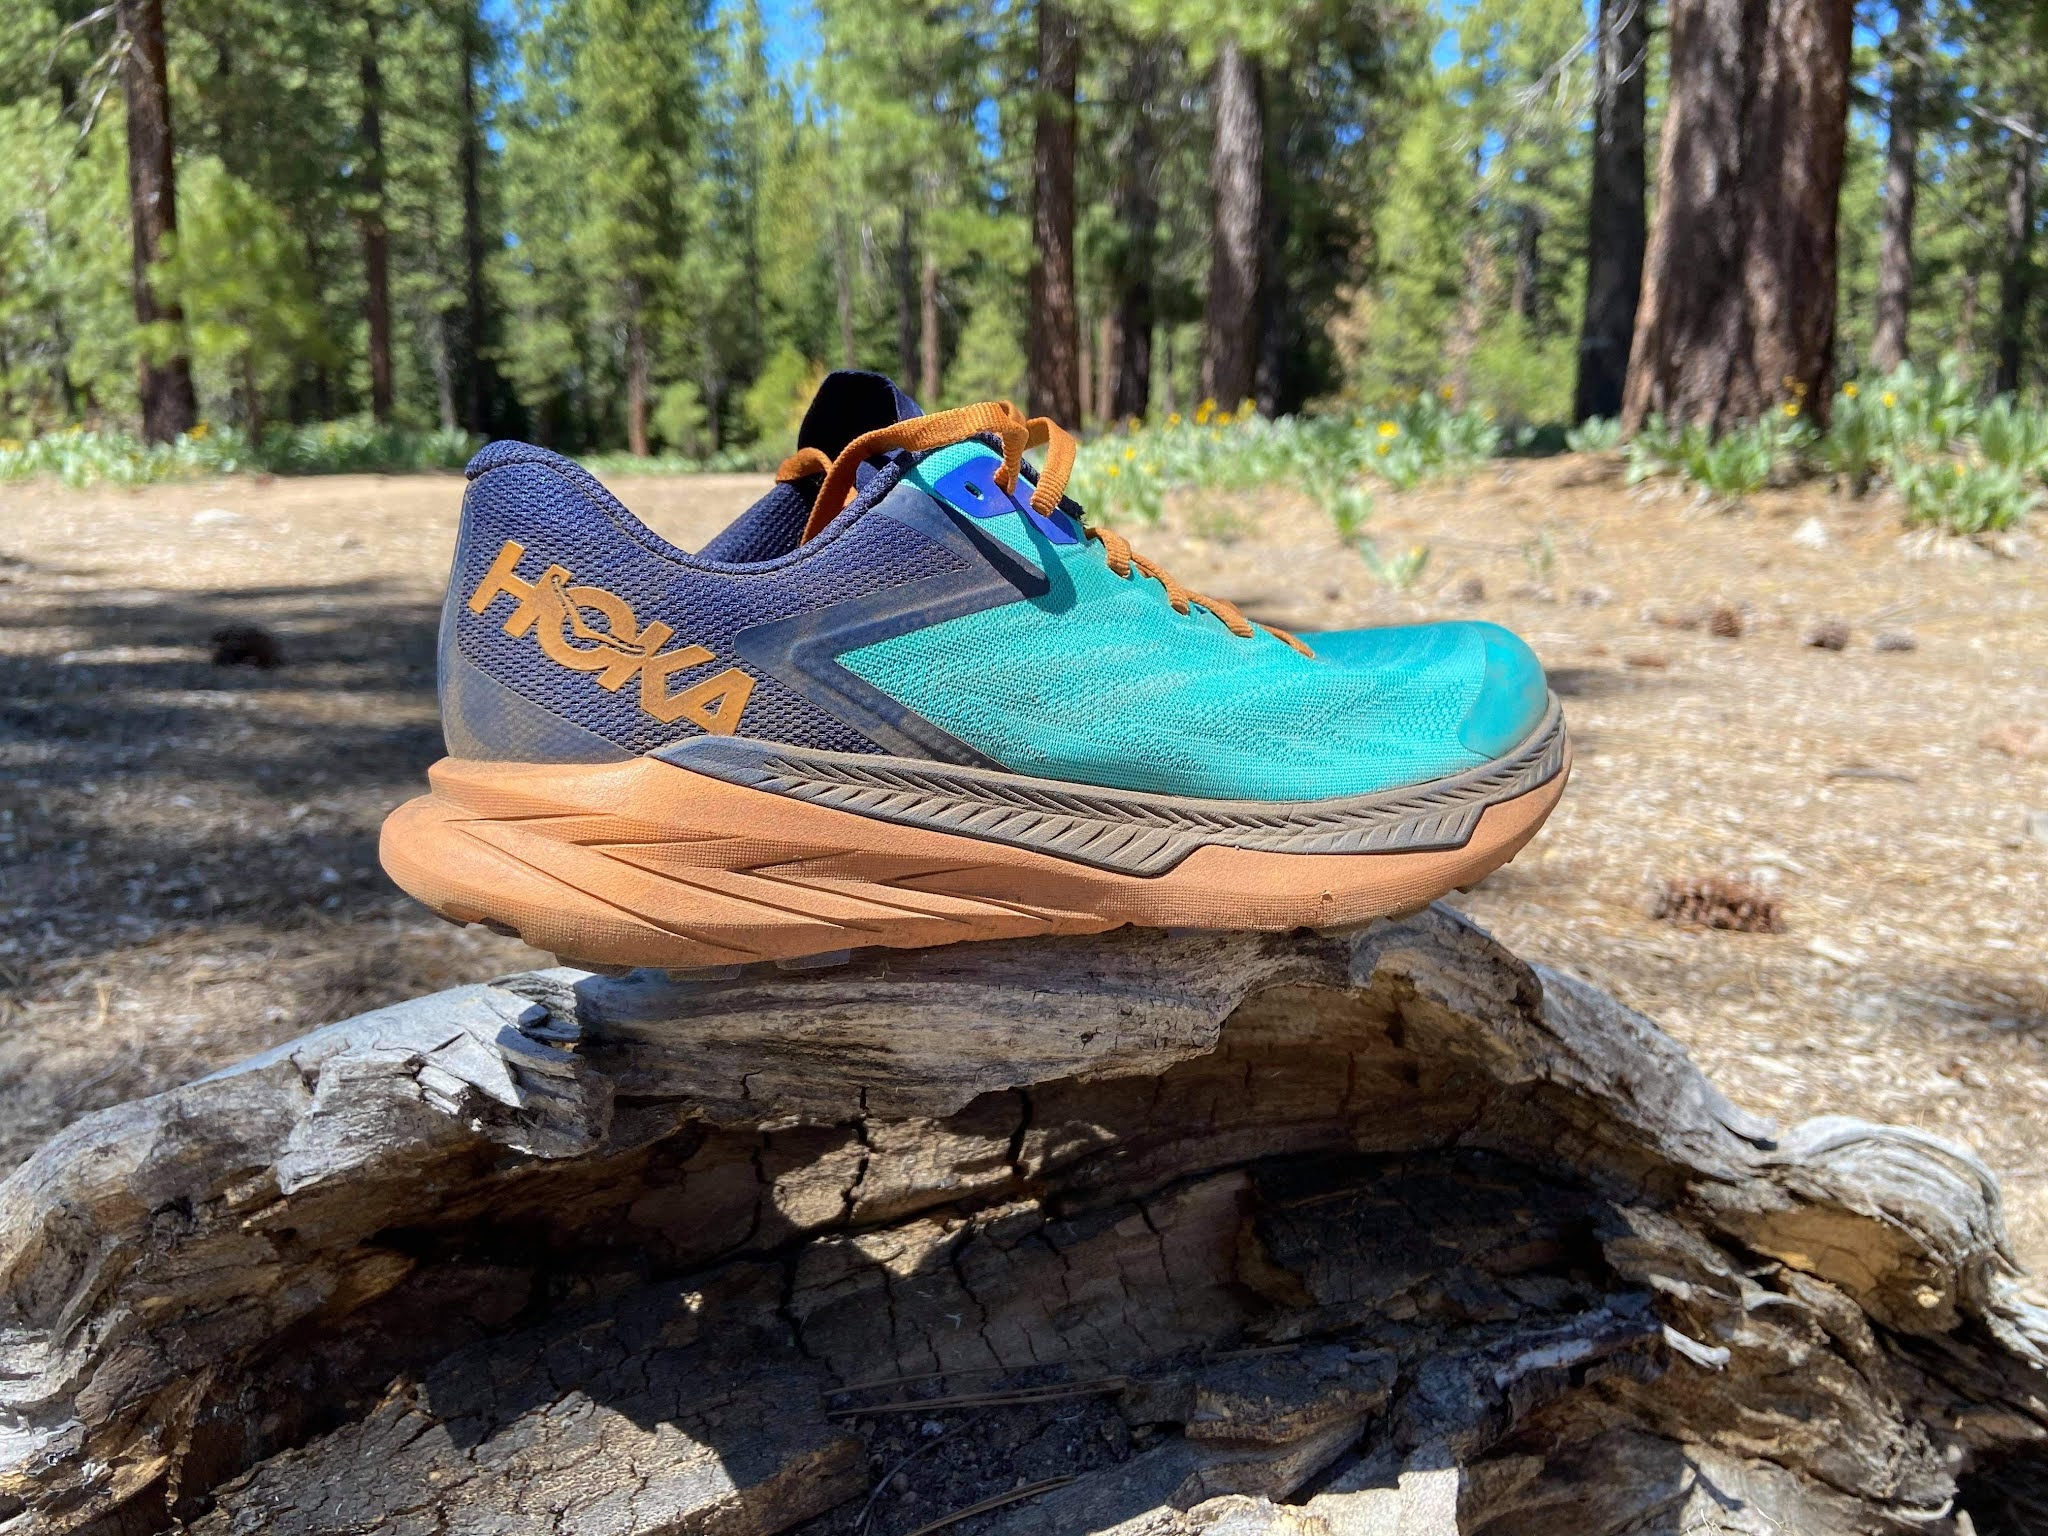 Hoka One One Zinal Trail Shoe Review (2021) - DOCTORS OF RUNNING